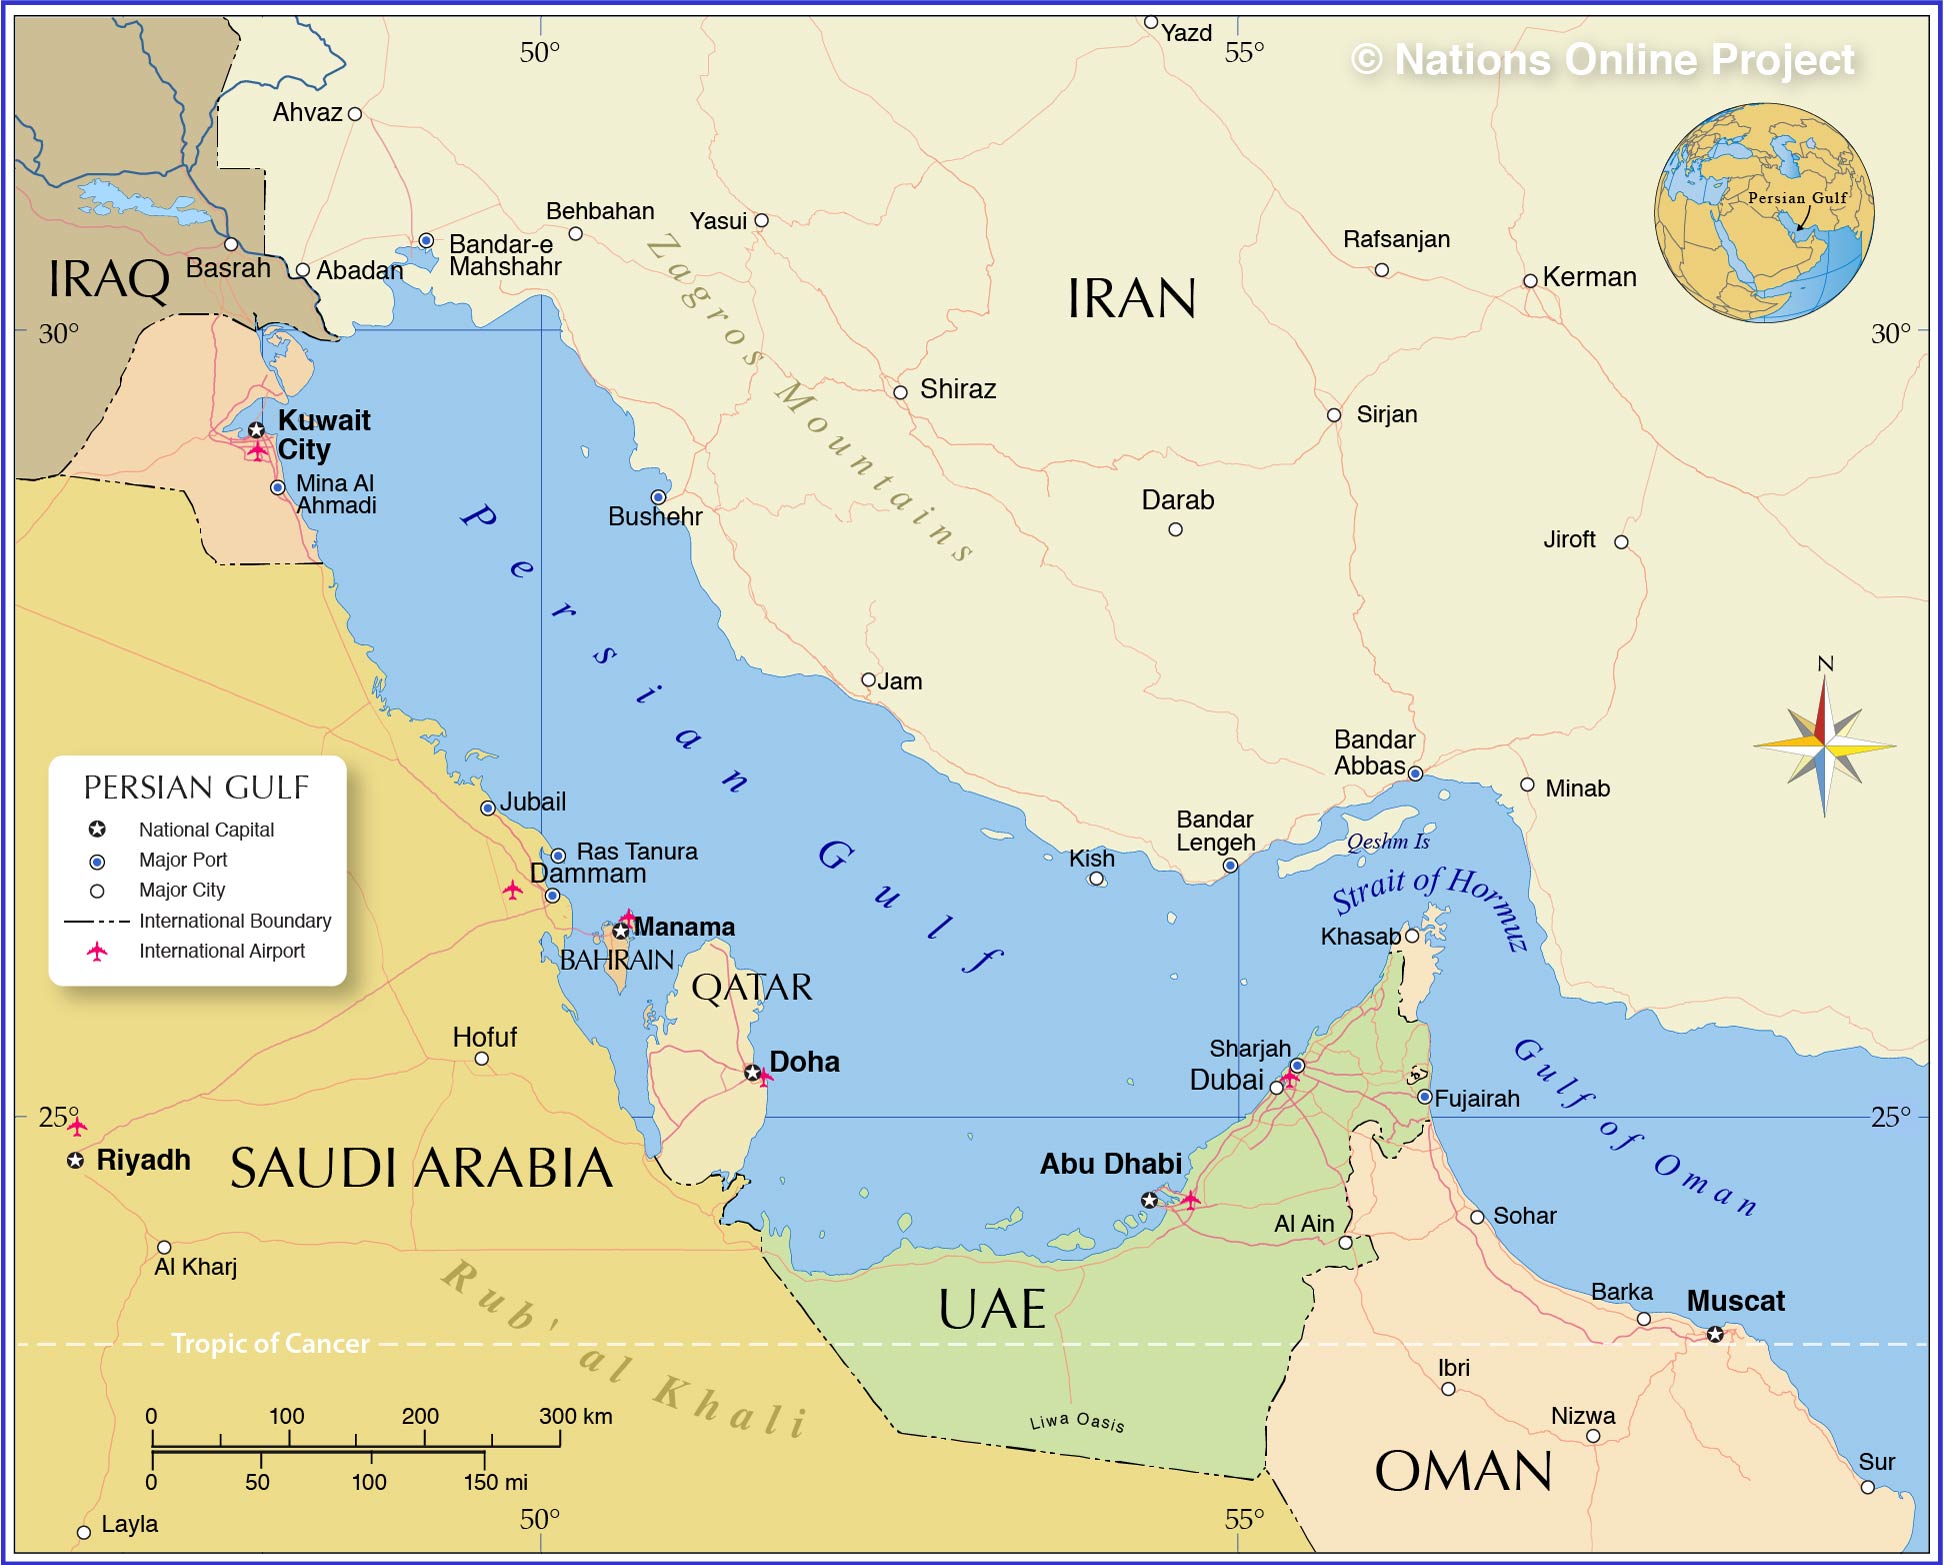 Where Is The Persian Gulf Located On A World Map Political Map of Persian Gulf   Nations Online Project